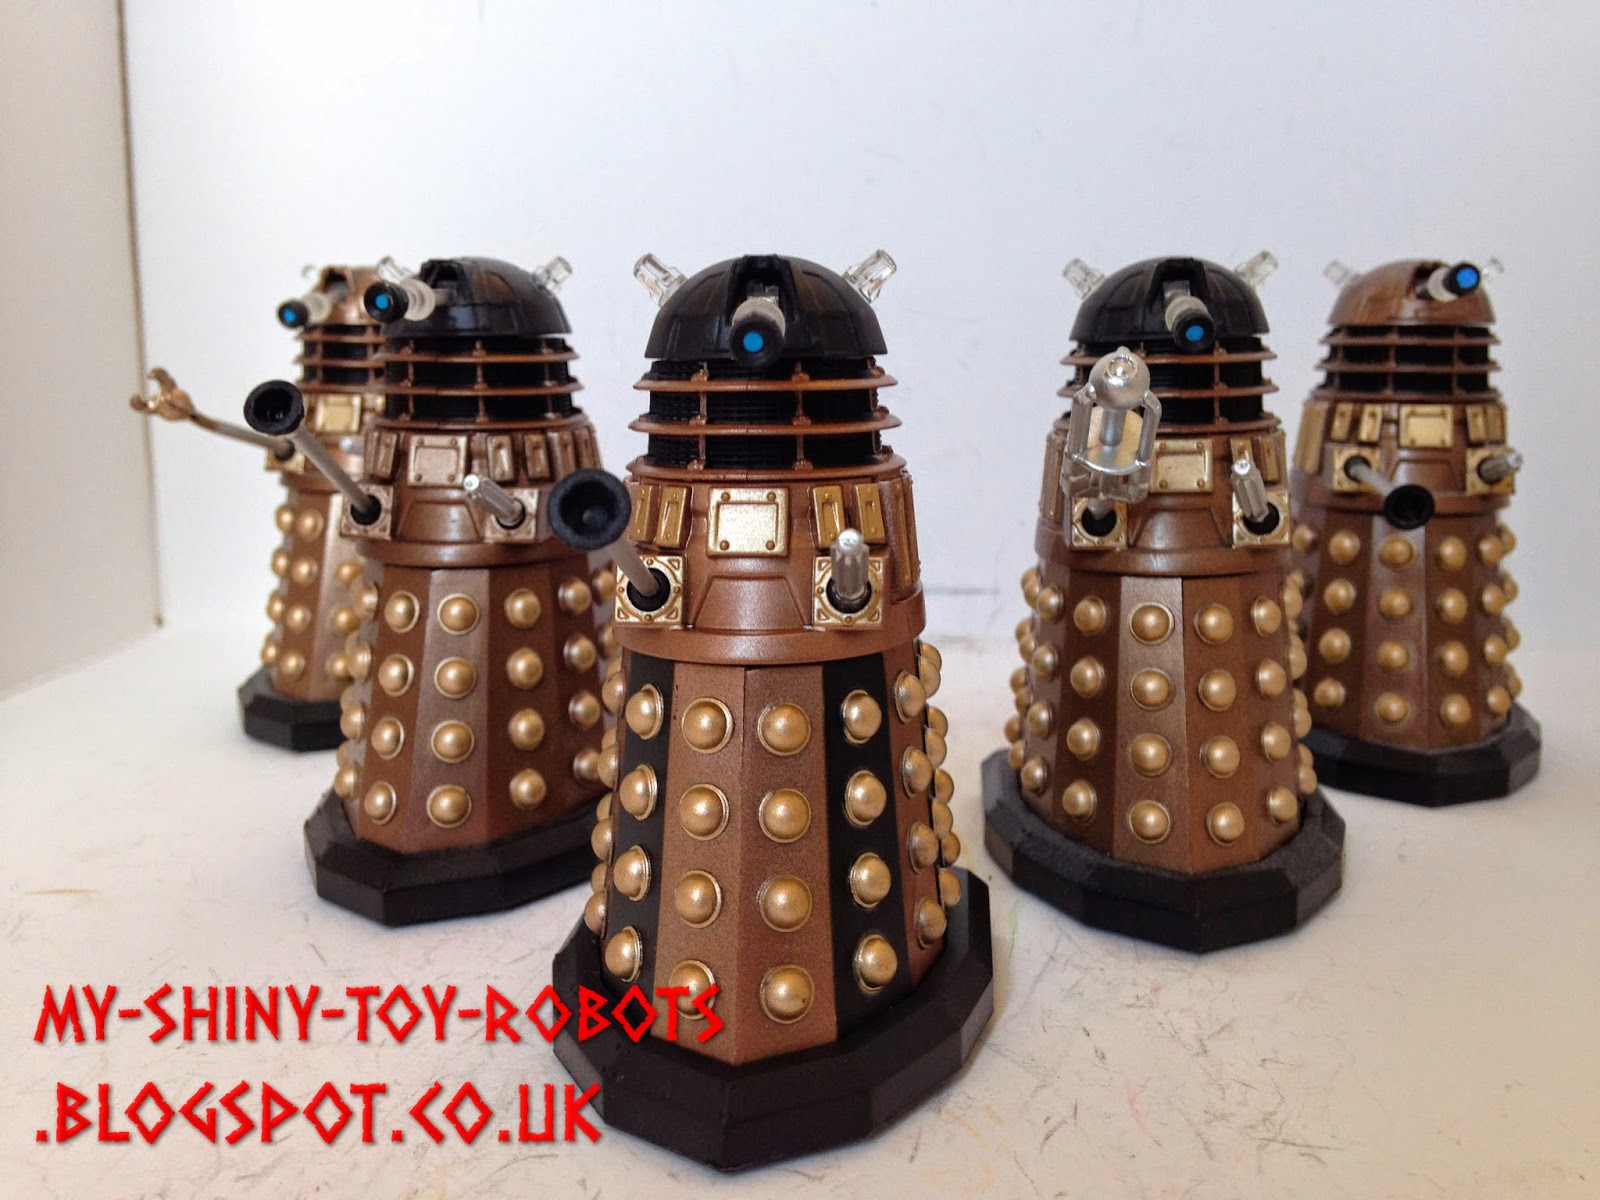 Daleks conquer and destroy